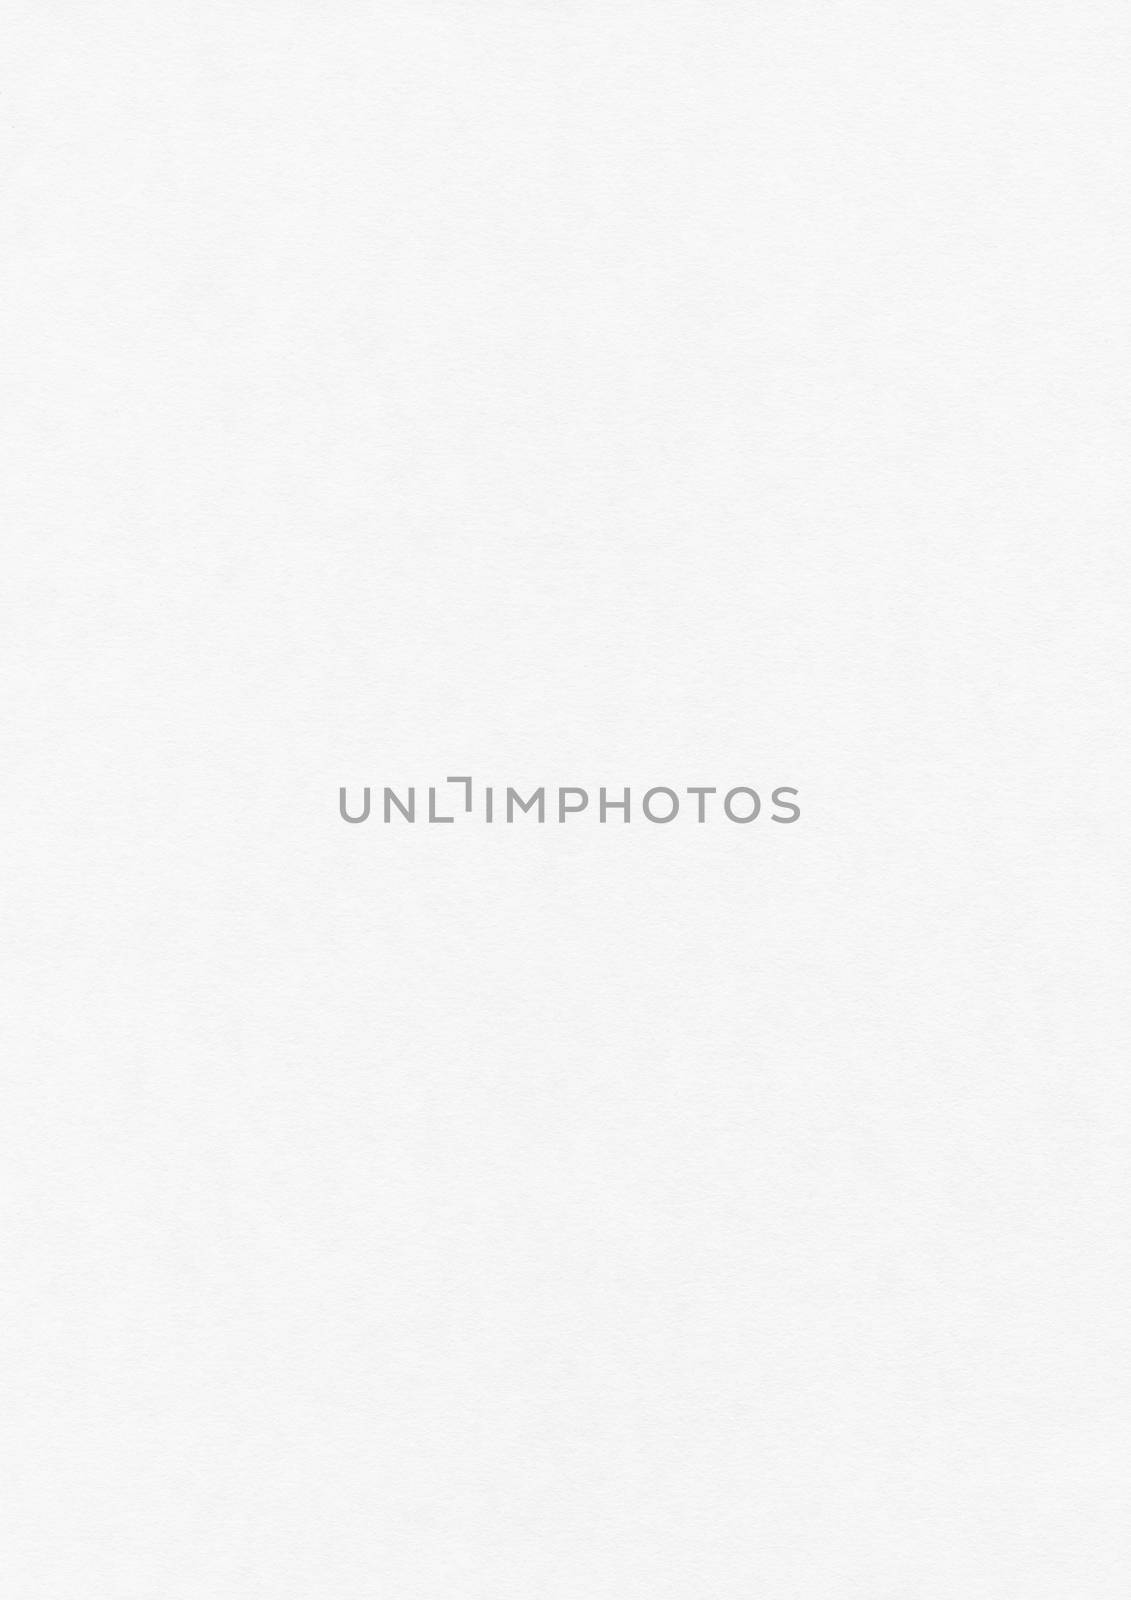 Blank white paper sheet texture mockup template